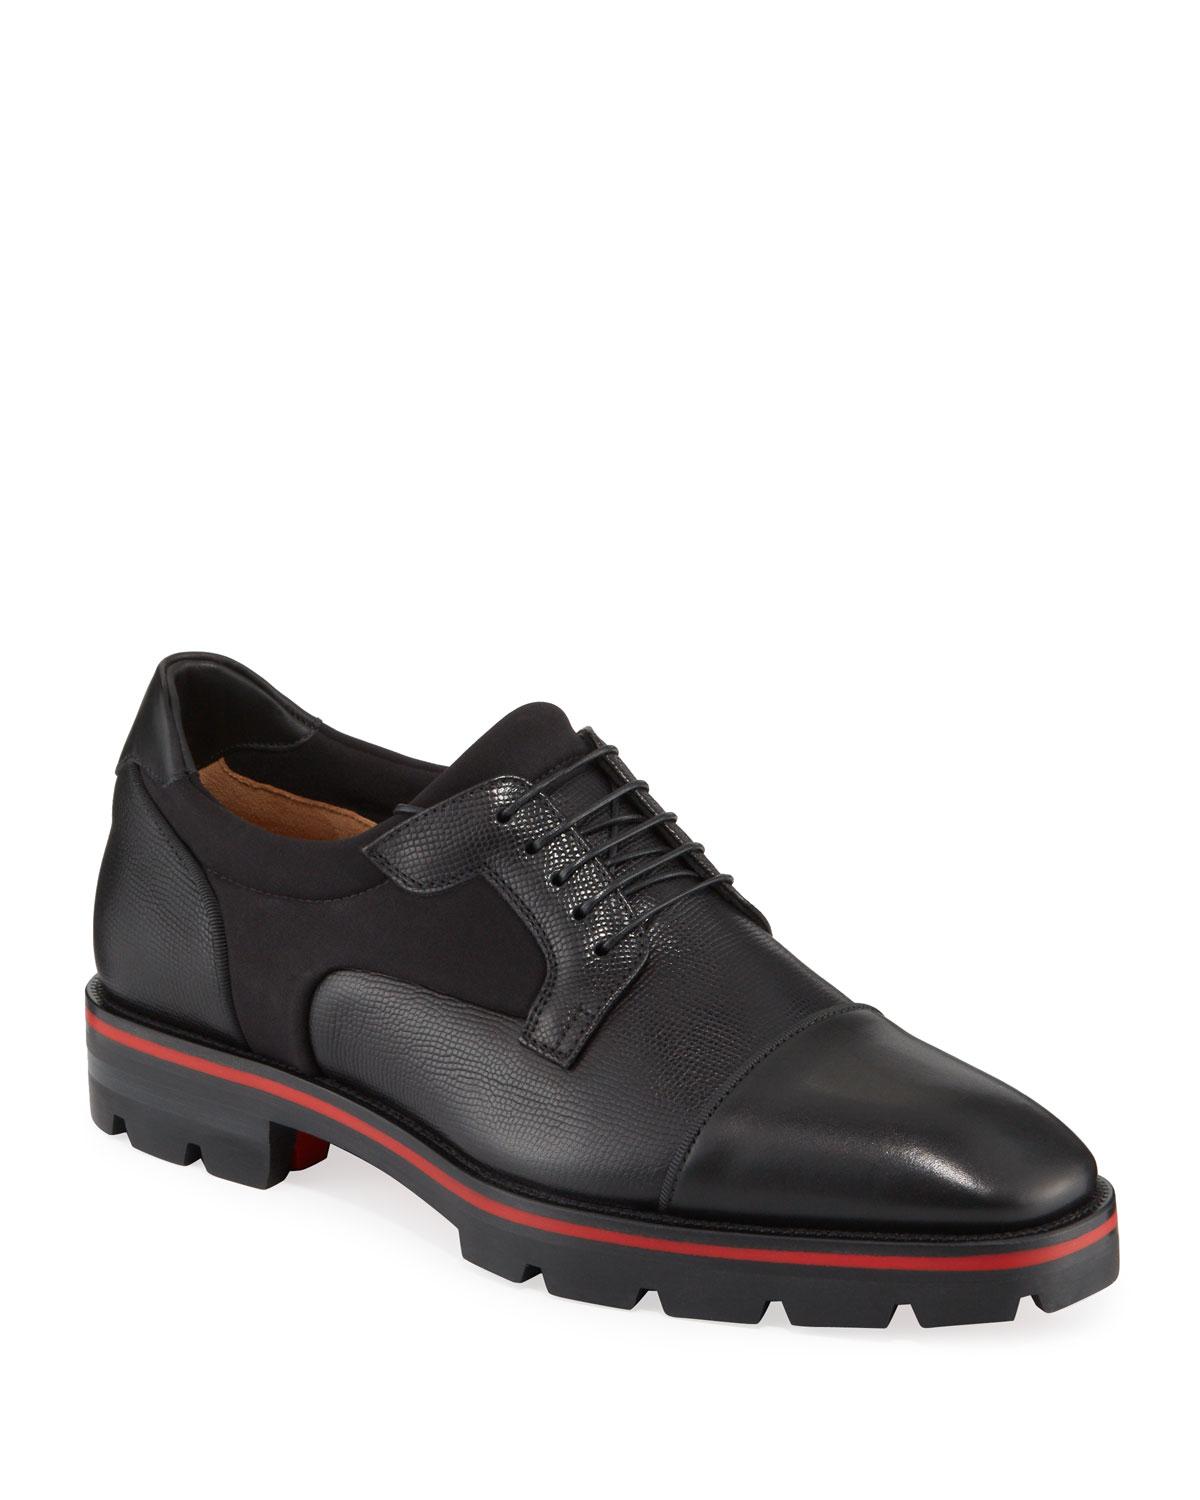 Christian Louboutin Men's Mika Sky Leather Lace Up in Black for Men - Lyst